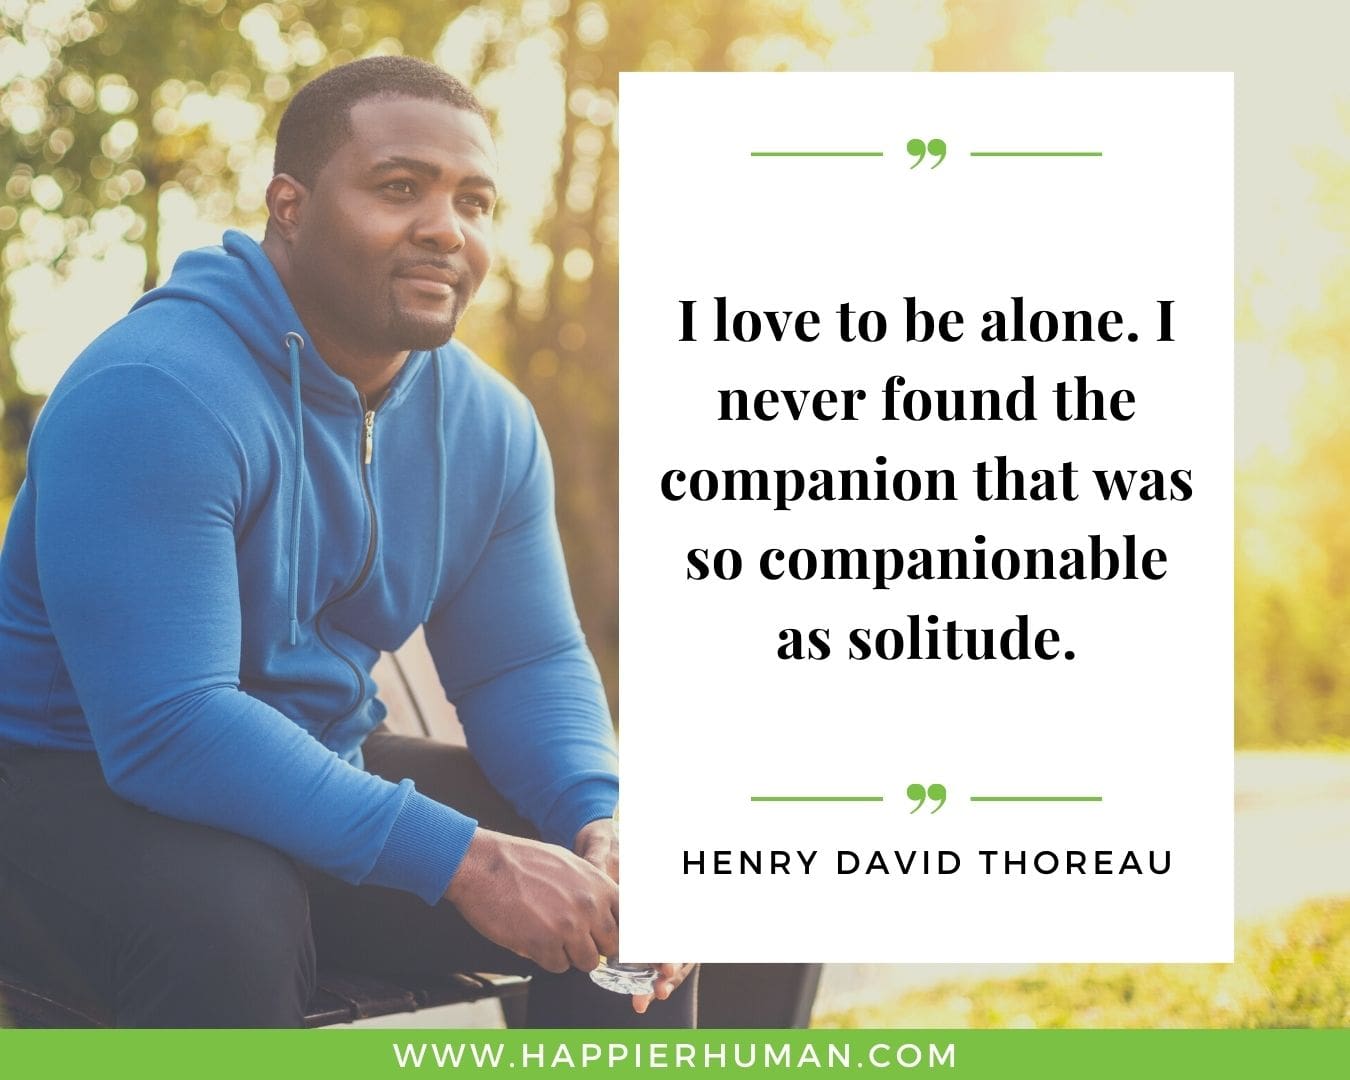 Introvert Quotes - “I love to be alone. I never found the companion that was so companionable as solitude.” – Henry David Thoreau